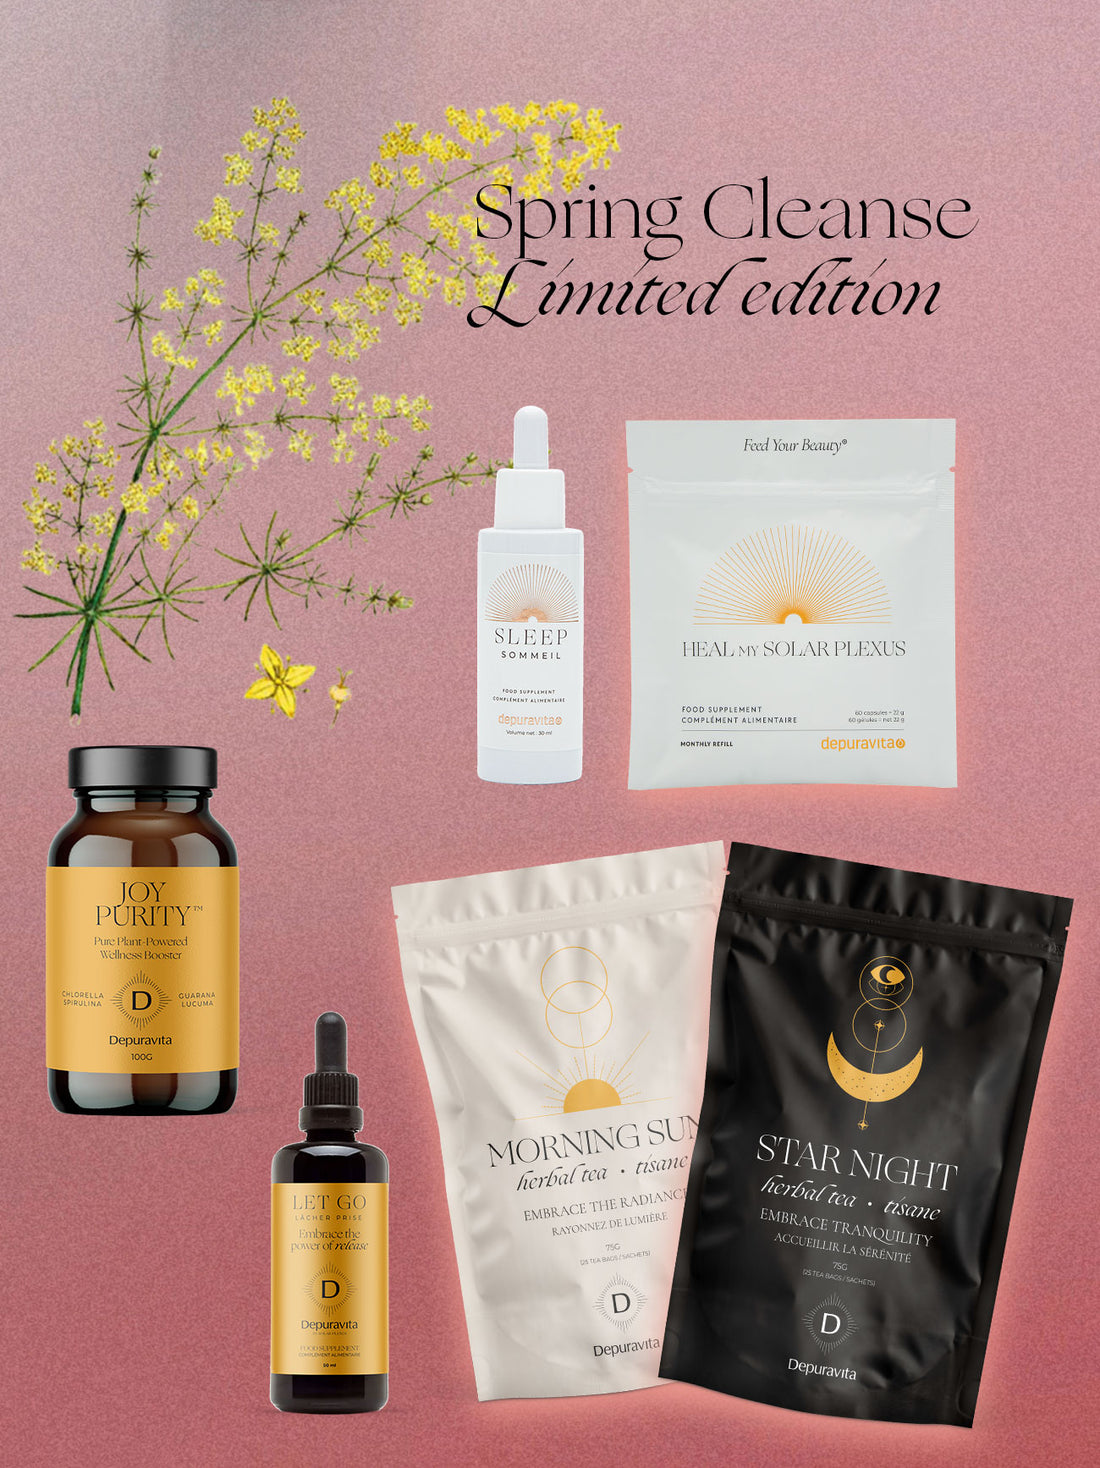 The Spring Cleanse